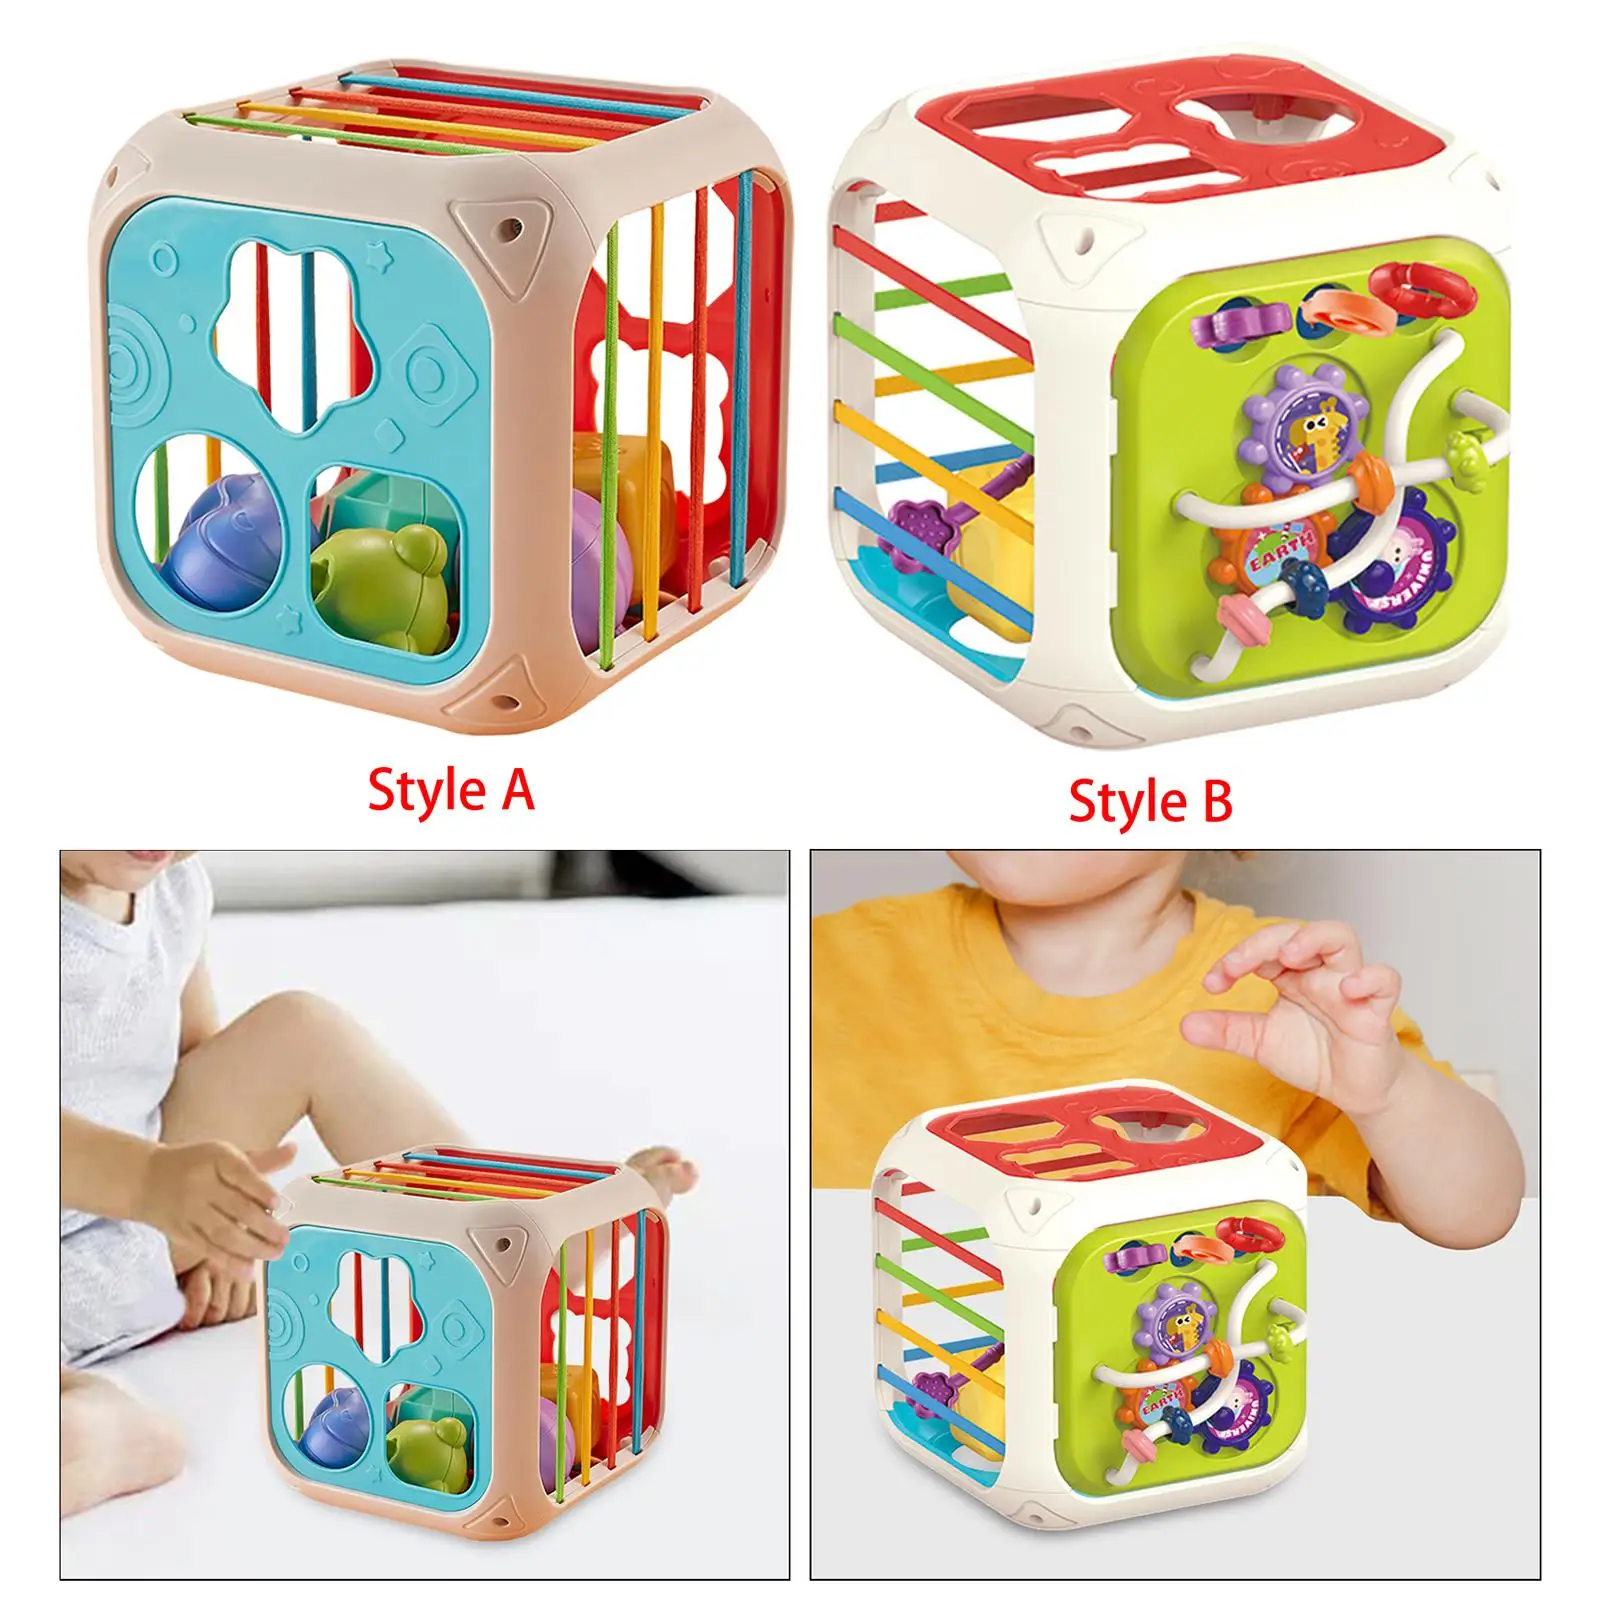 Sensory Bin Shape Sorter Toys Educational Fine Motor Skills Color Recognition Matching for Baby Toddlers Birthday Gift Kids